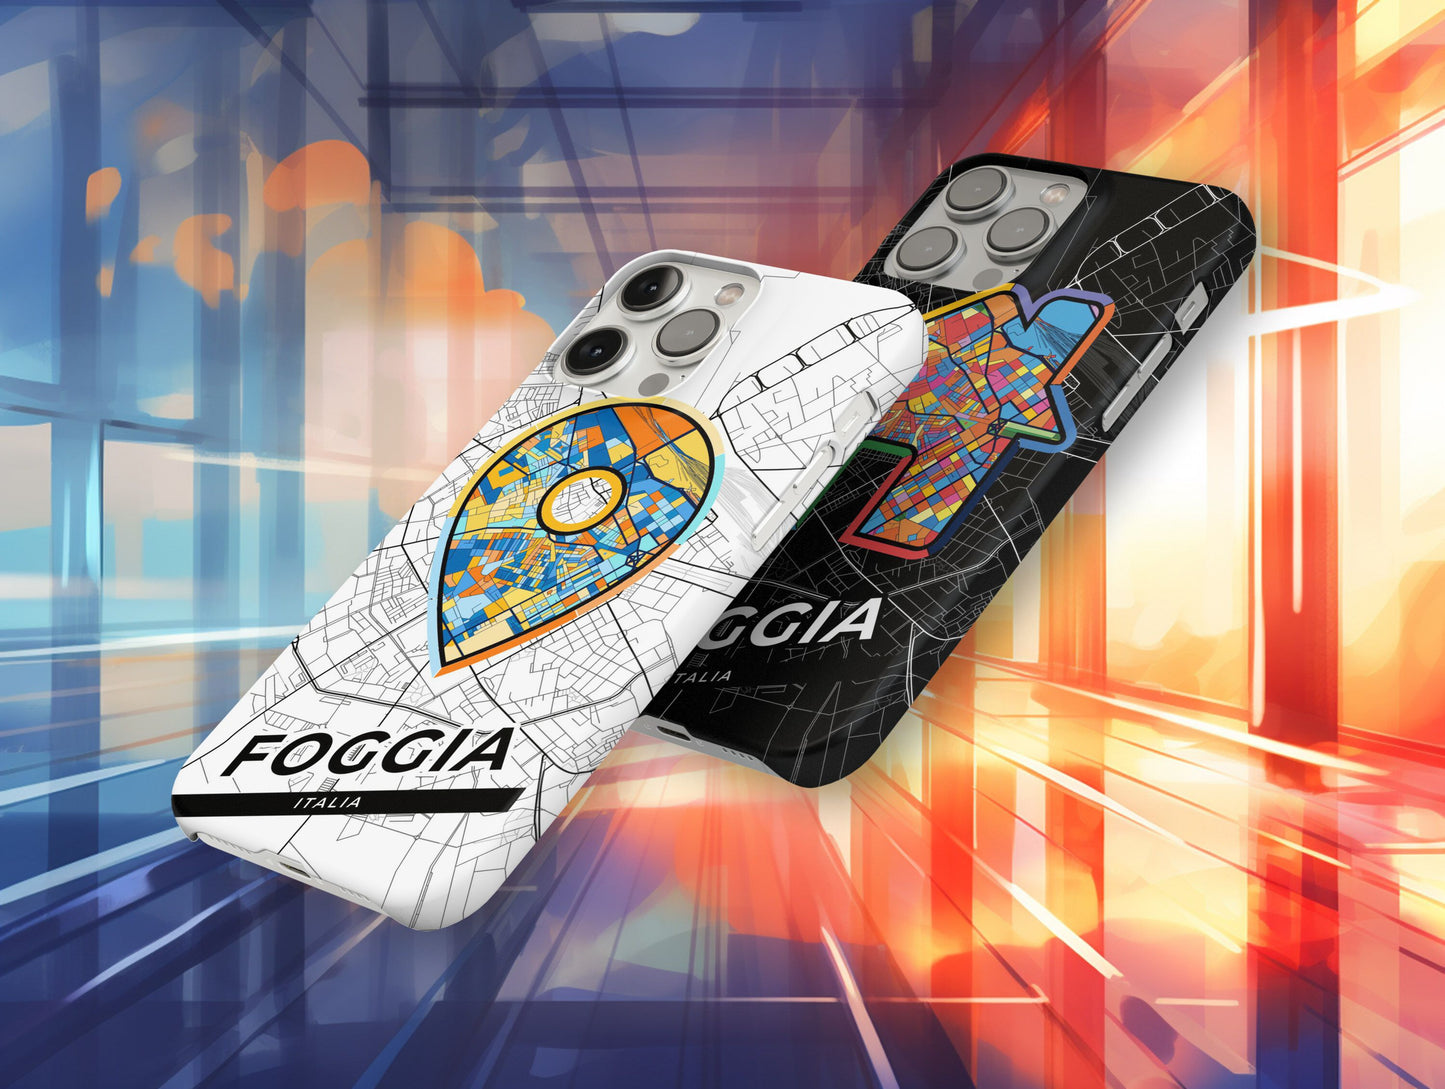 Foggia Italy slim phone case with colorful icon. Birthday, wedding or housewarming gift. Couple match cases.